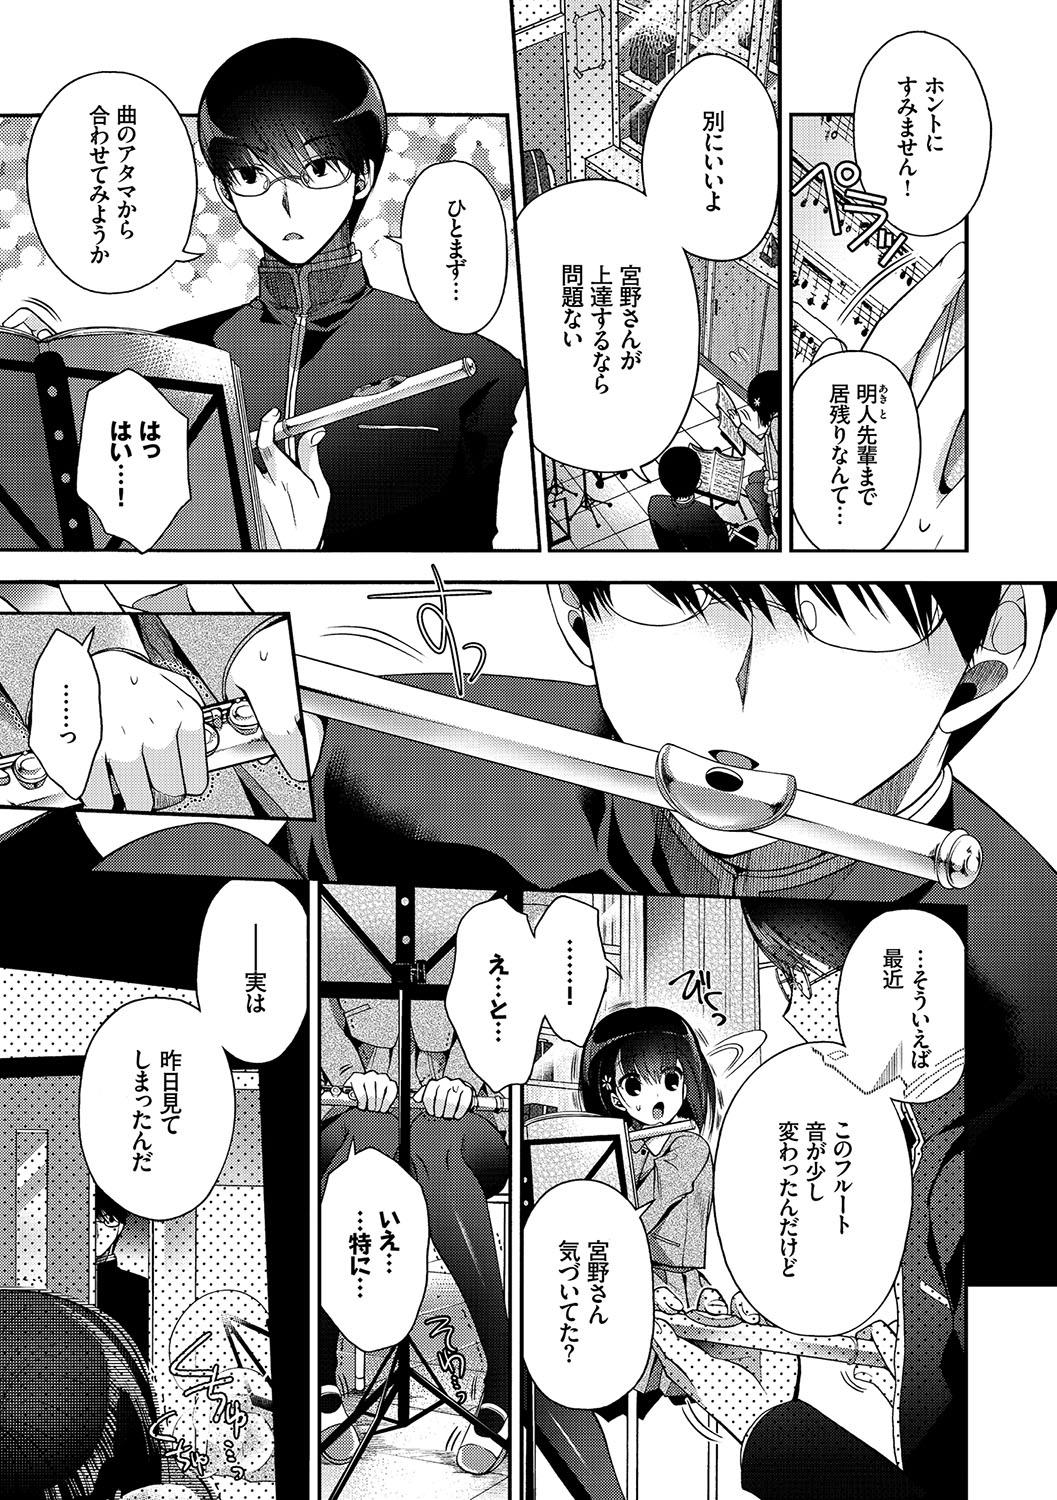 Belly Hatsukoi Melty - Melty First Love Stepsiblings - Page 6